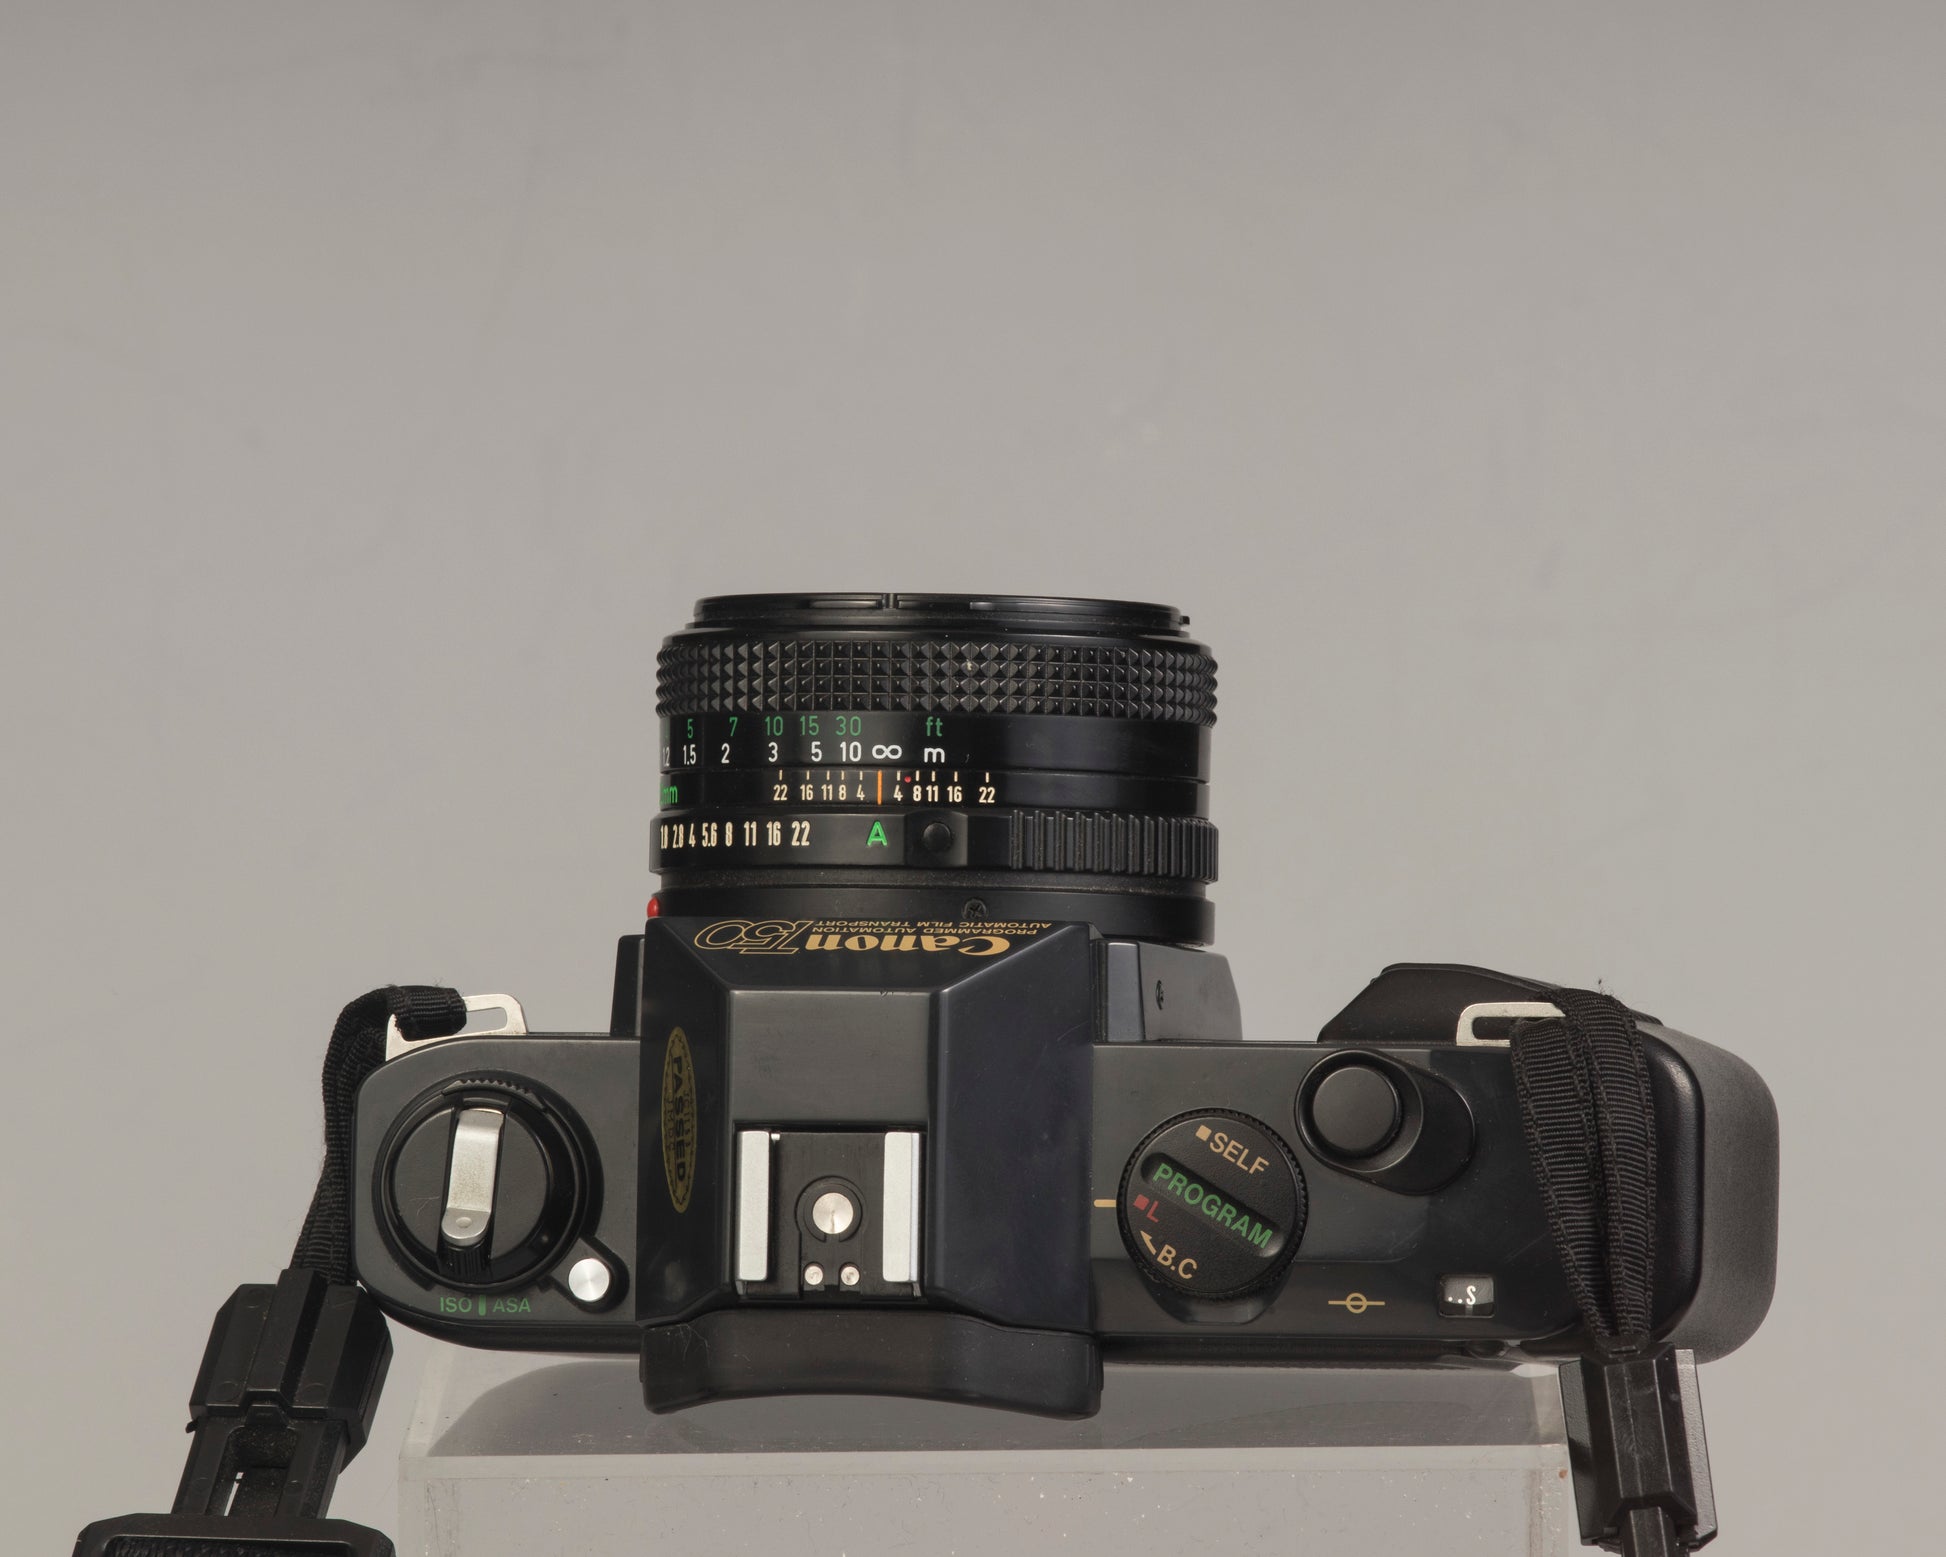 The Canon T50 35mm film SLR with the Canon FD 50mm f1.8 lens